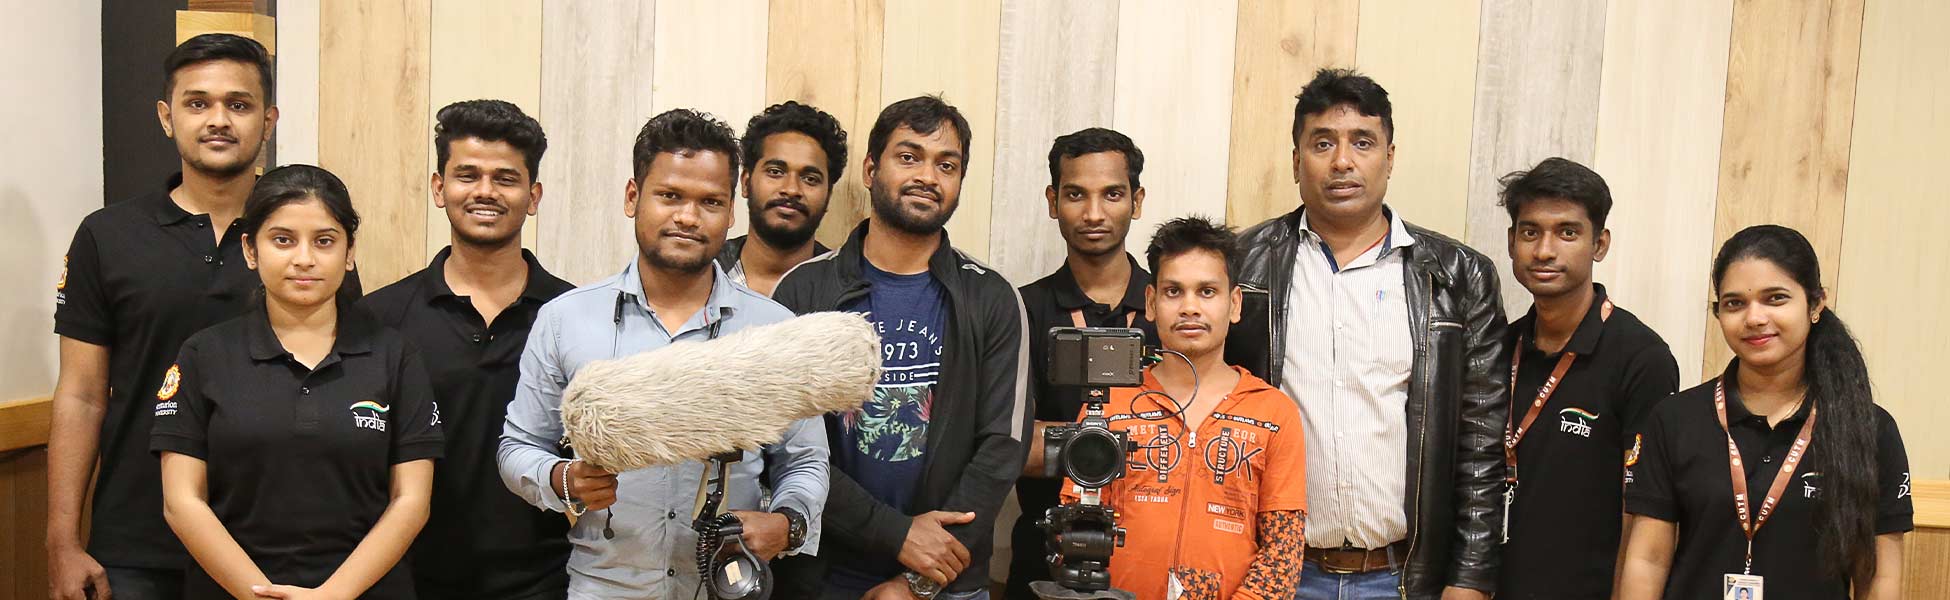 film production services in Noney, video production services in Noney, tv production services in Noney, production services in Noney